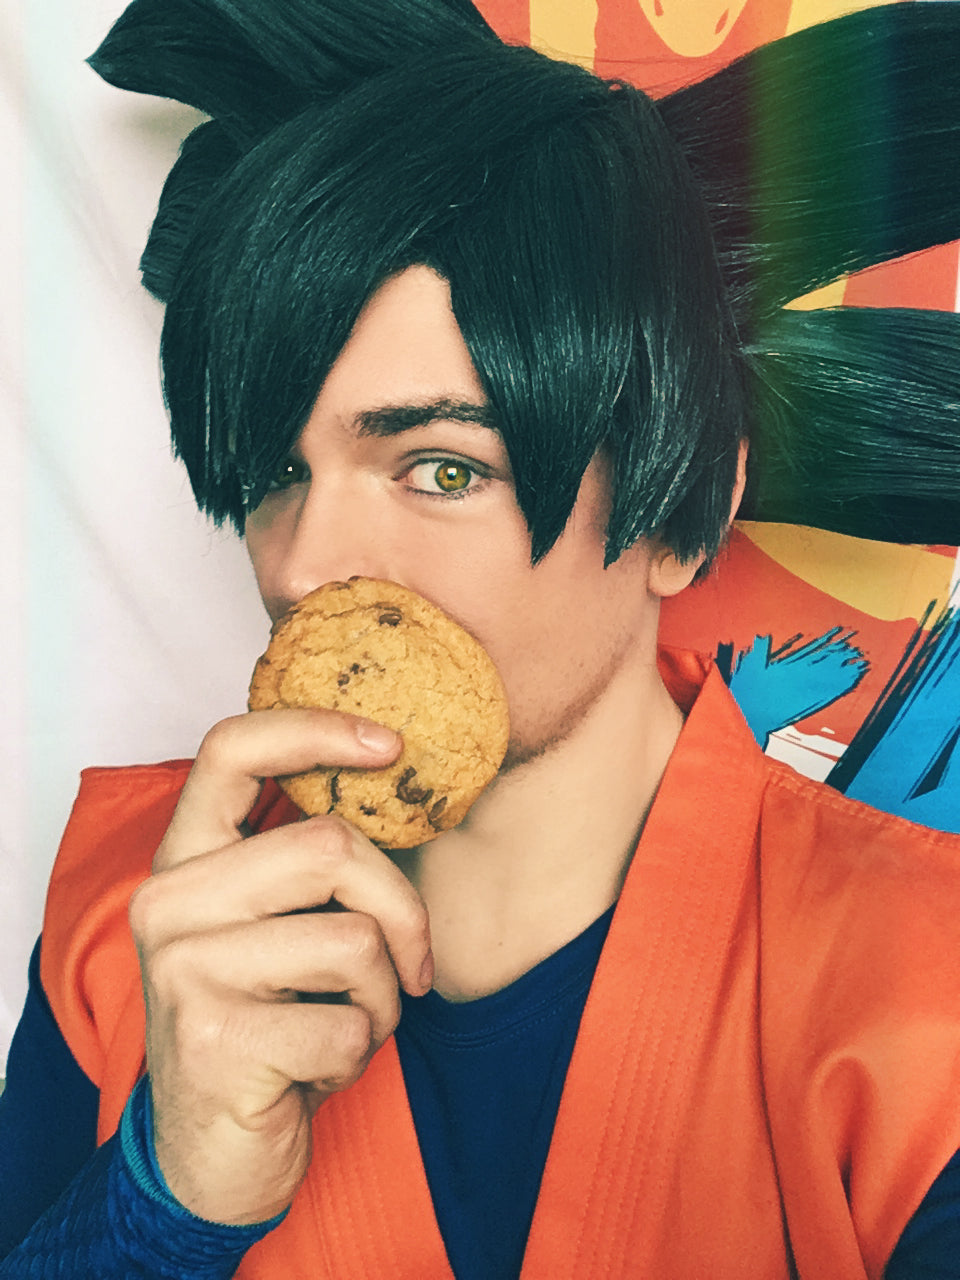 Goku cosplay from Dragon Ball Z holding a cookie